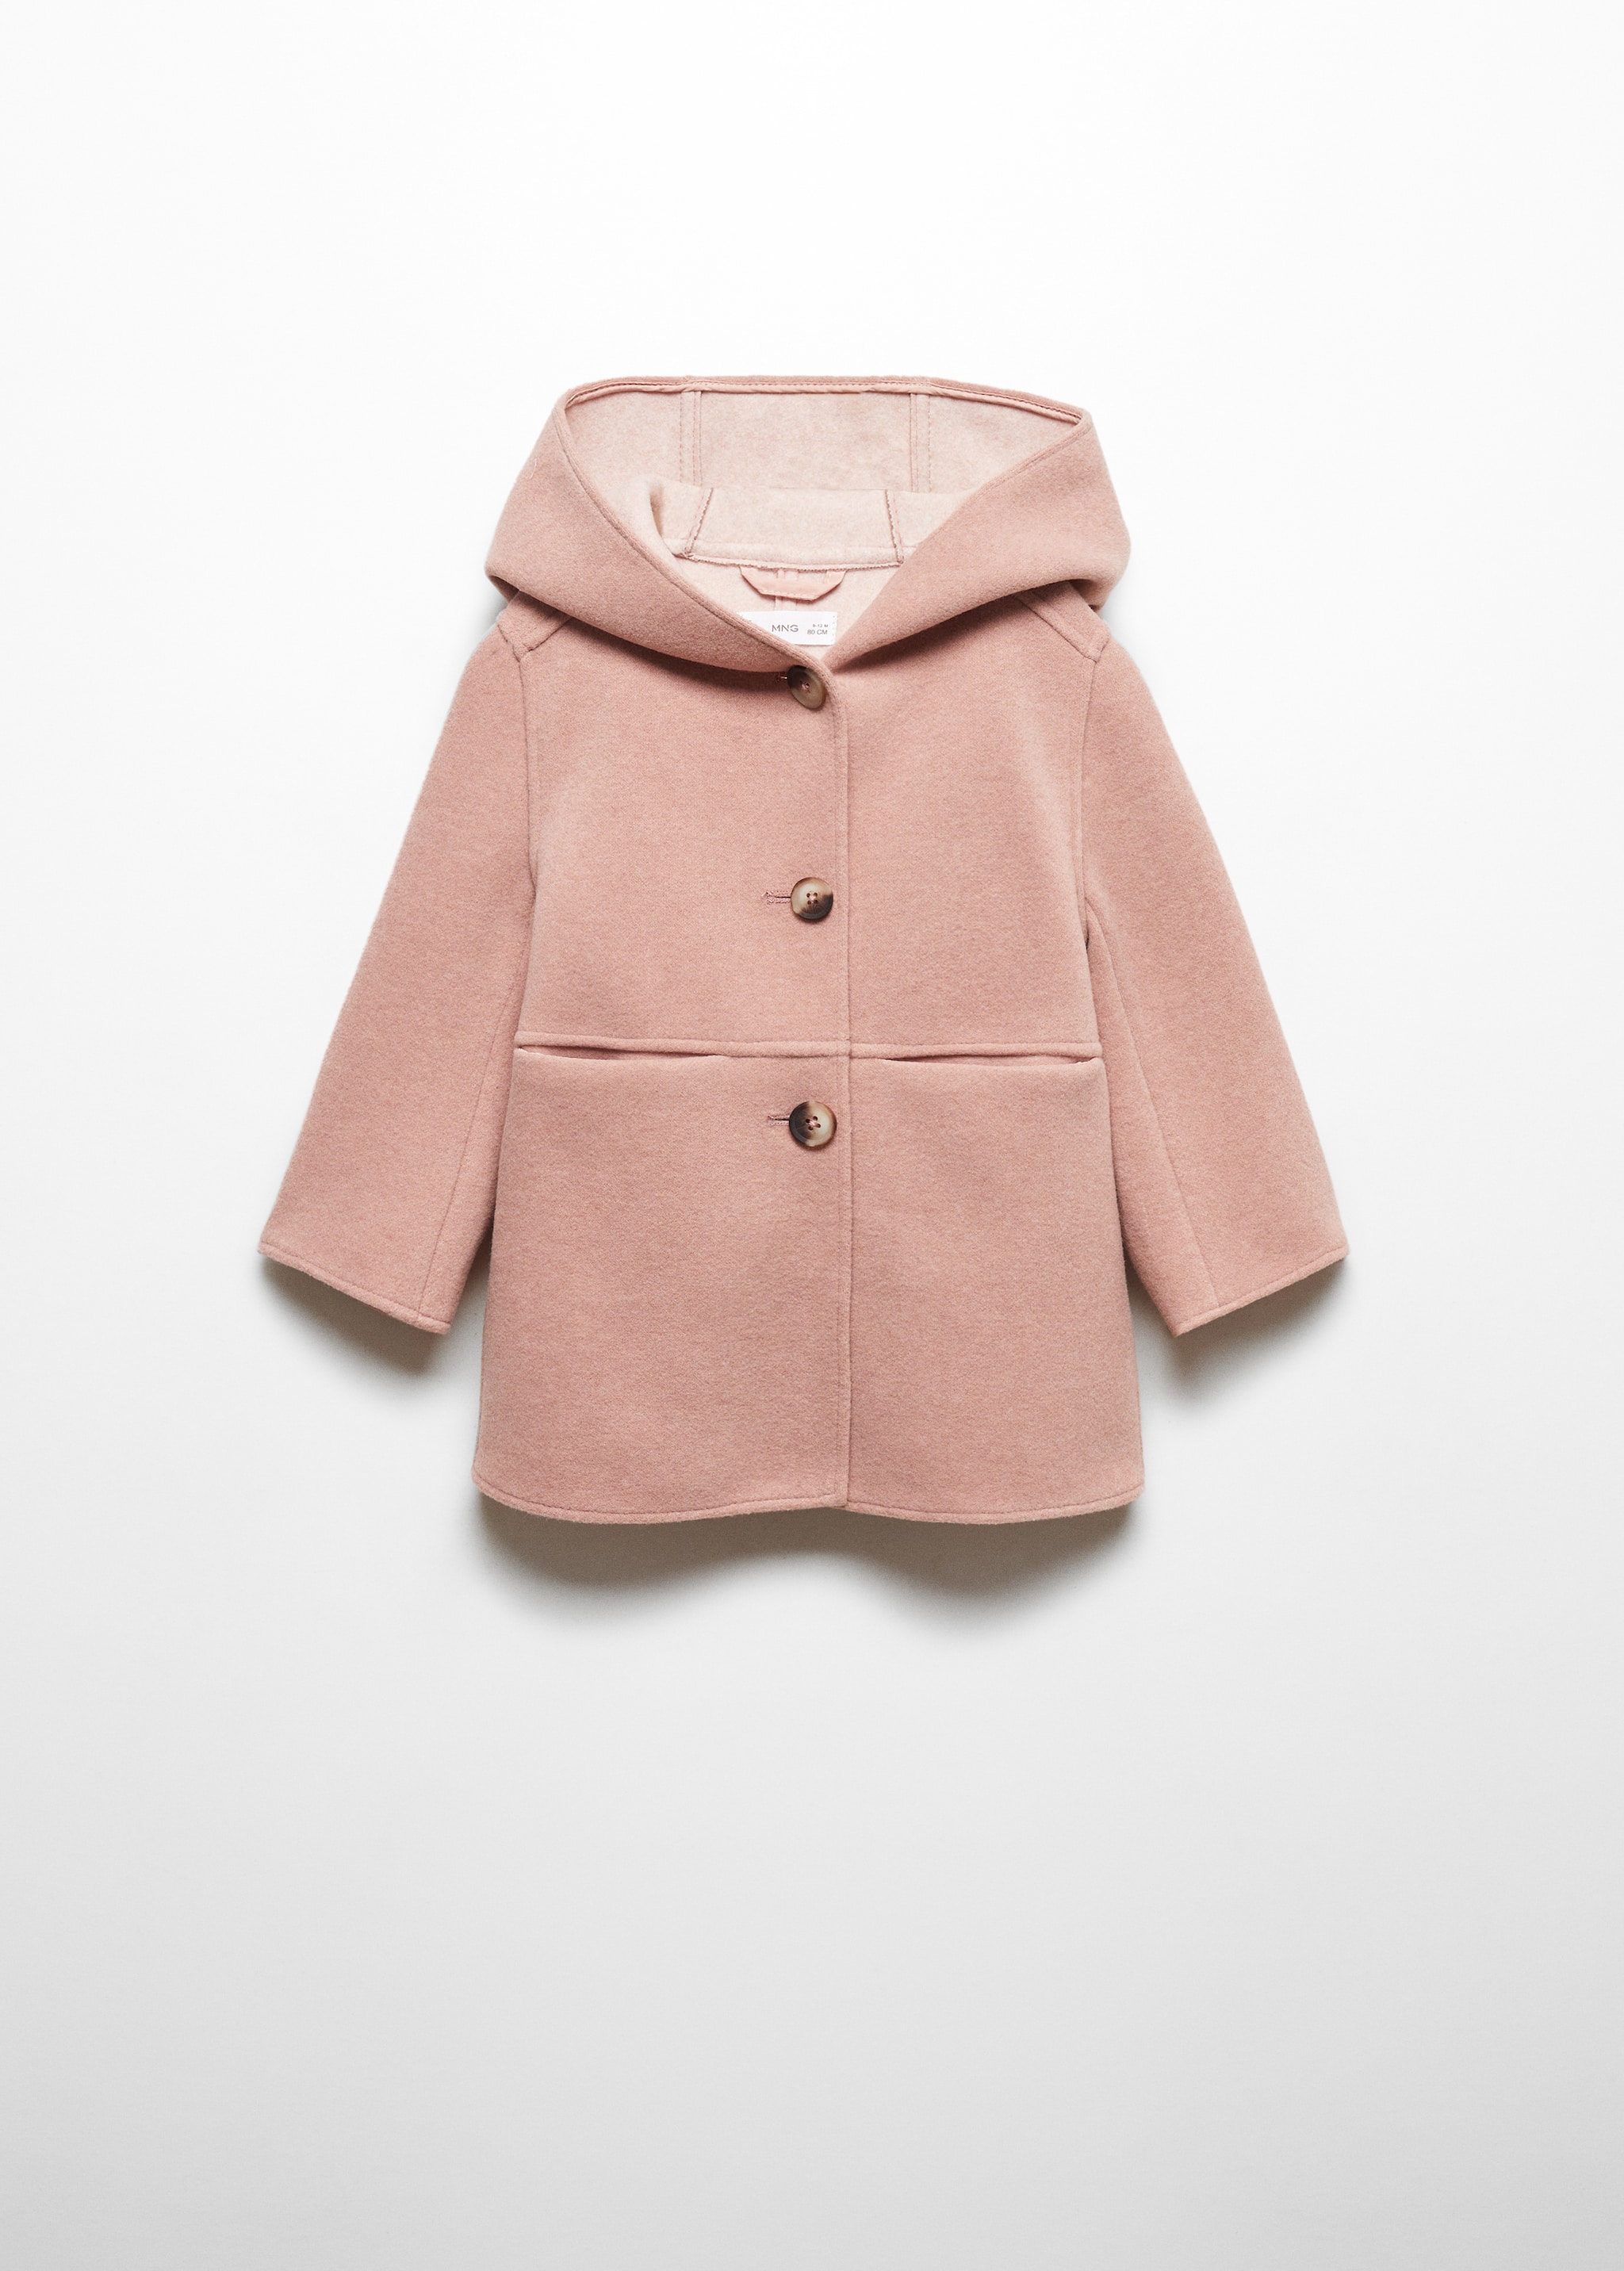 Hooded button coat - Article without model